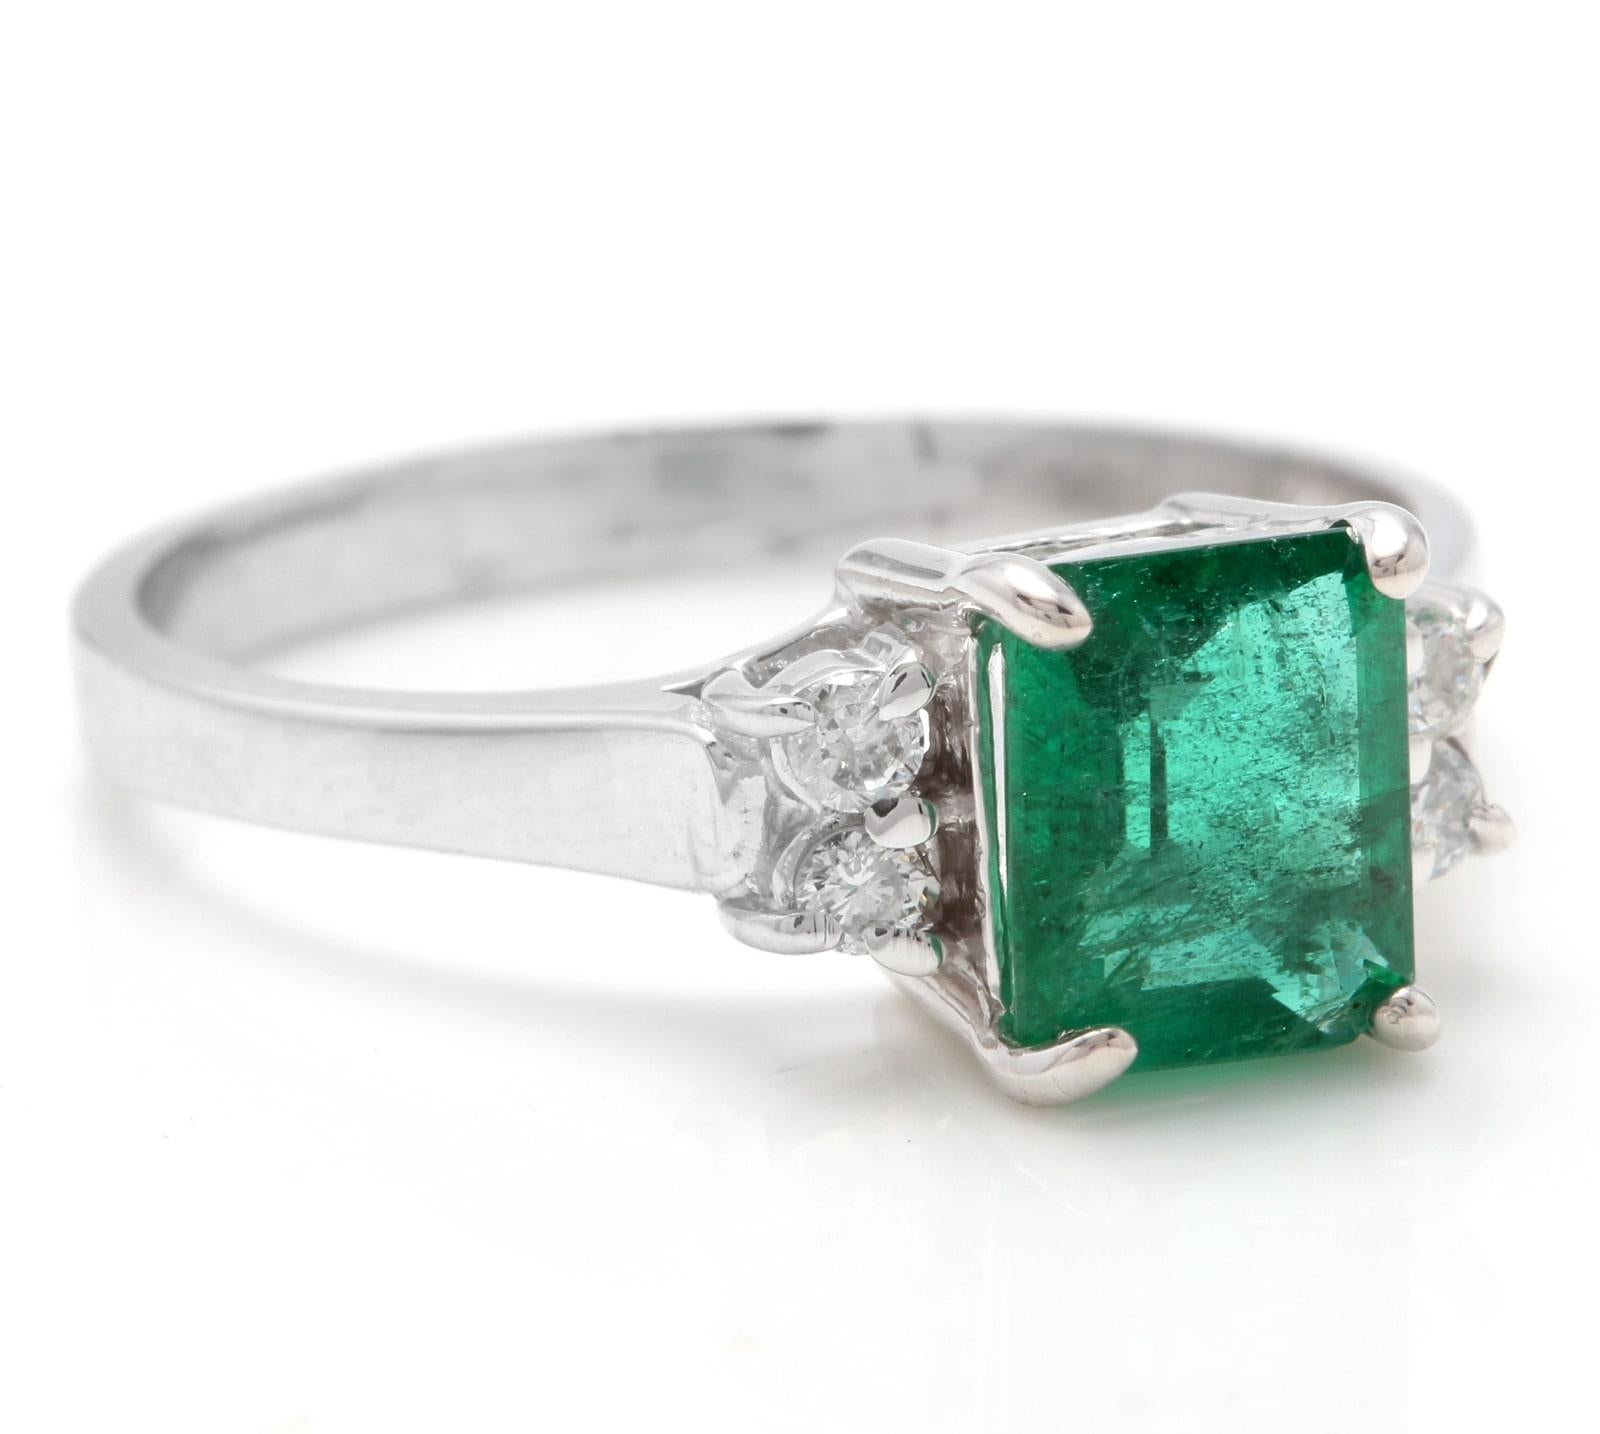 1.62 Carats Natural Emerald and Diamond 14K Solid White Gold Ring

Suggested Replacement Value: $4,500.00

Total Natural Green Emerald Weight is: Approx. 1.50 Carats (transparent)

Emerald Measures: Approx. 7.25 x 6.29mm

Natural Round Diamonds